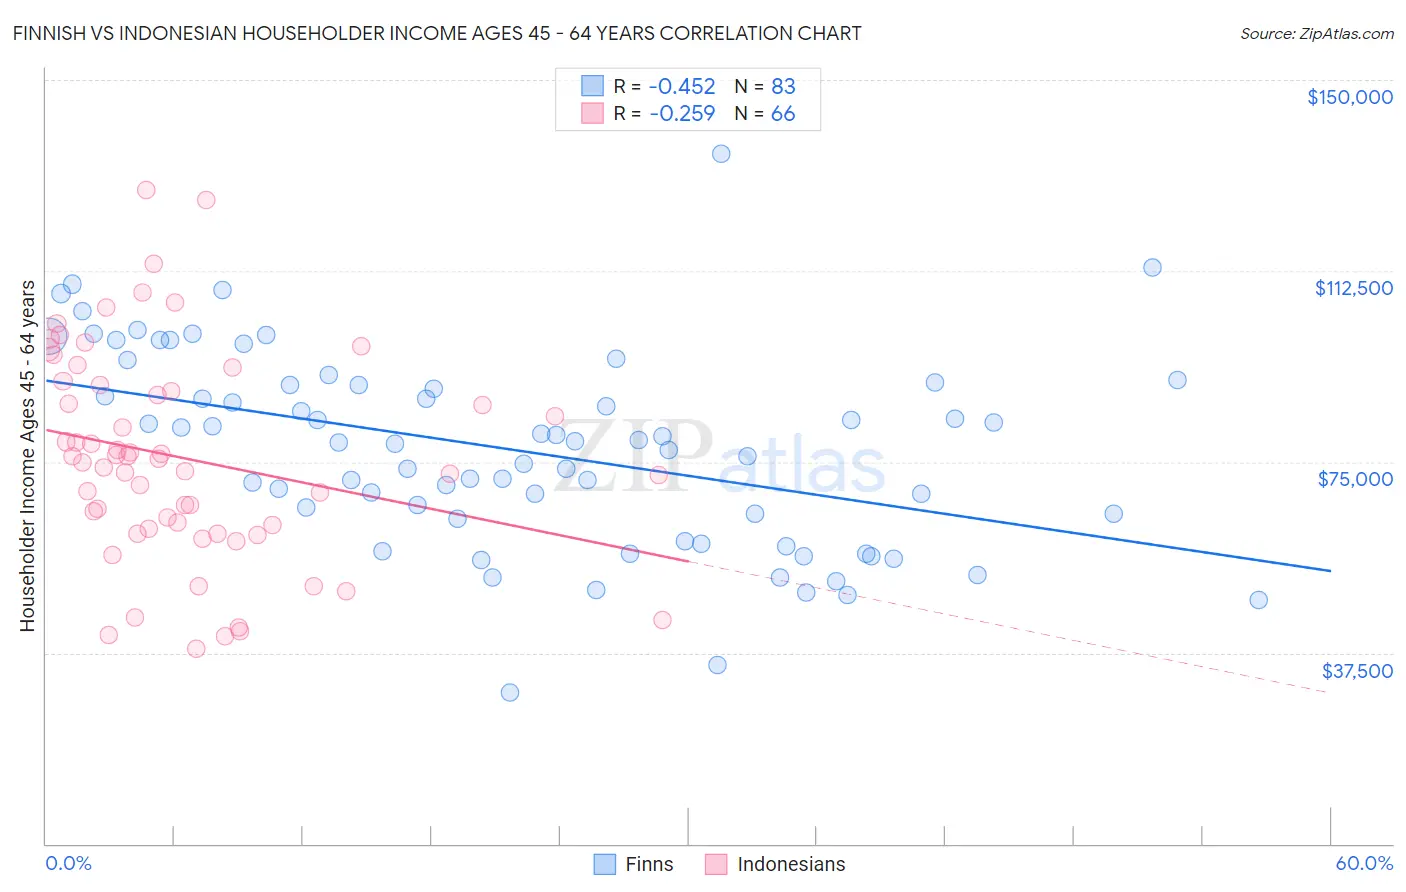 Finnish vs Indonesian Householder Income Ages 45 - 64 years